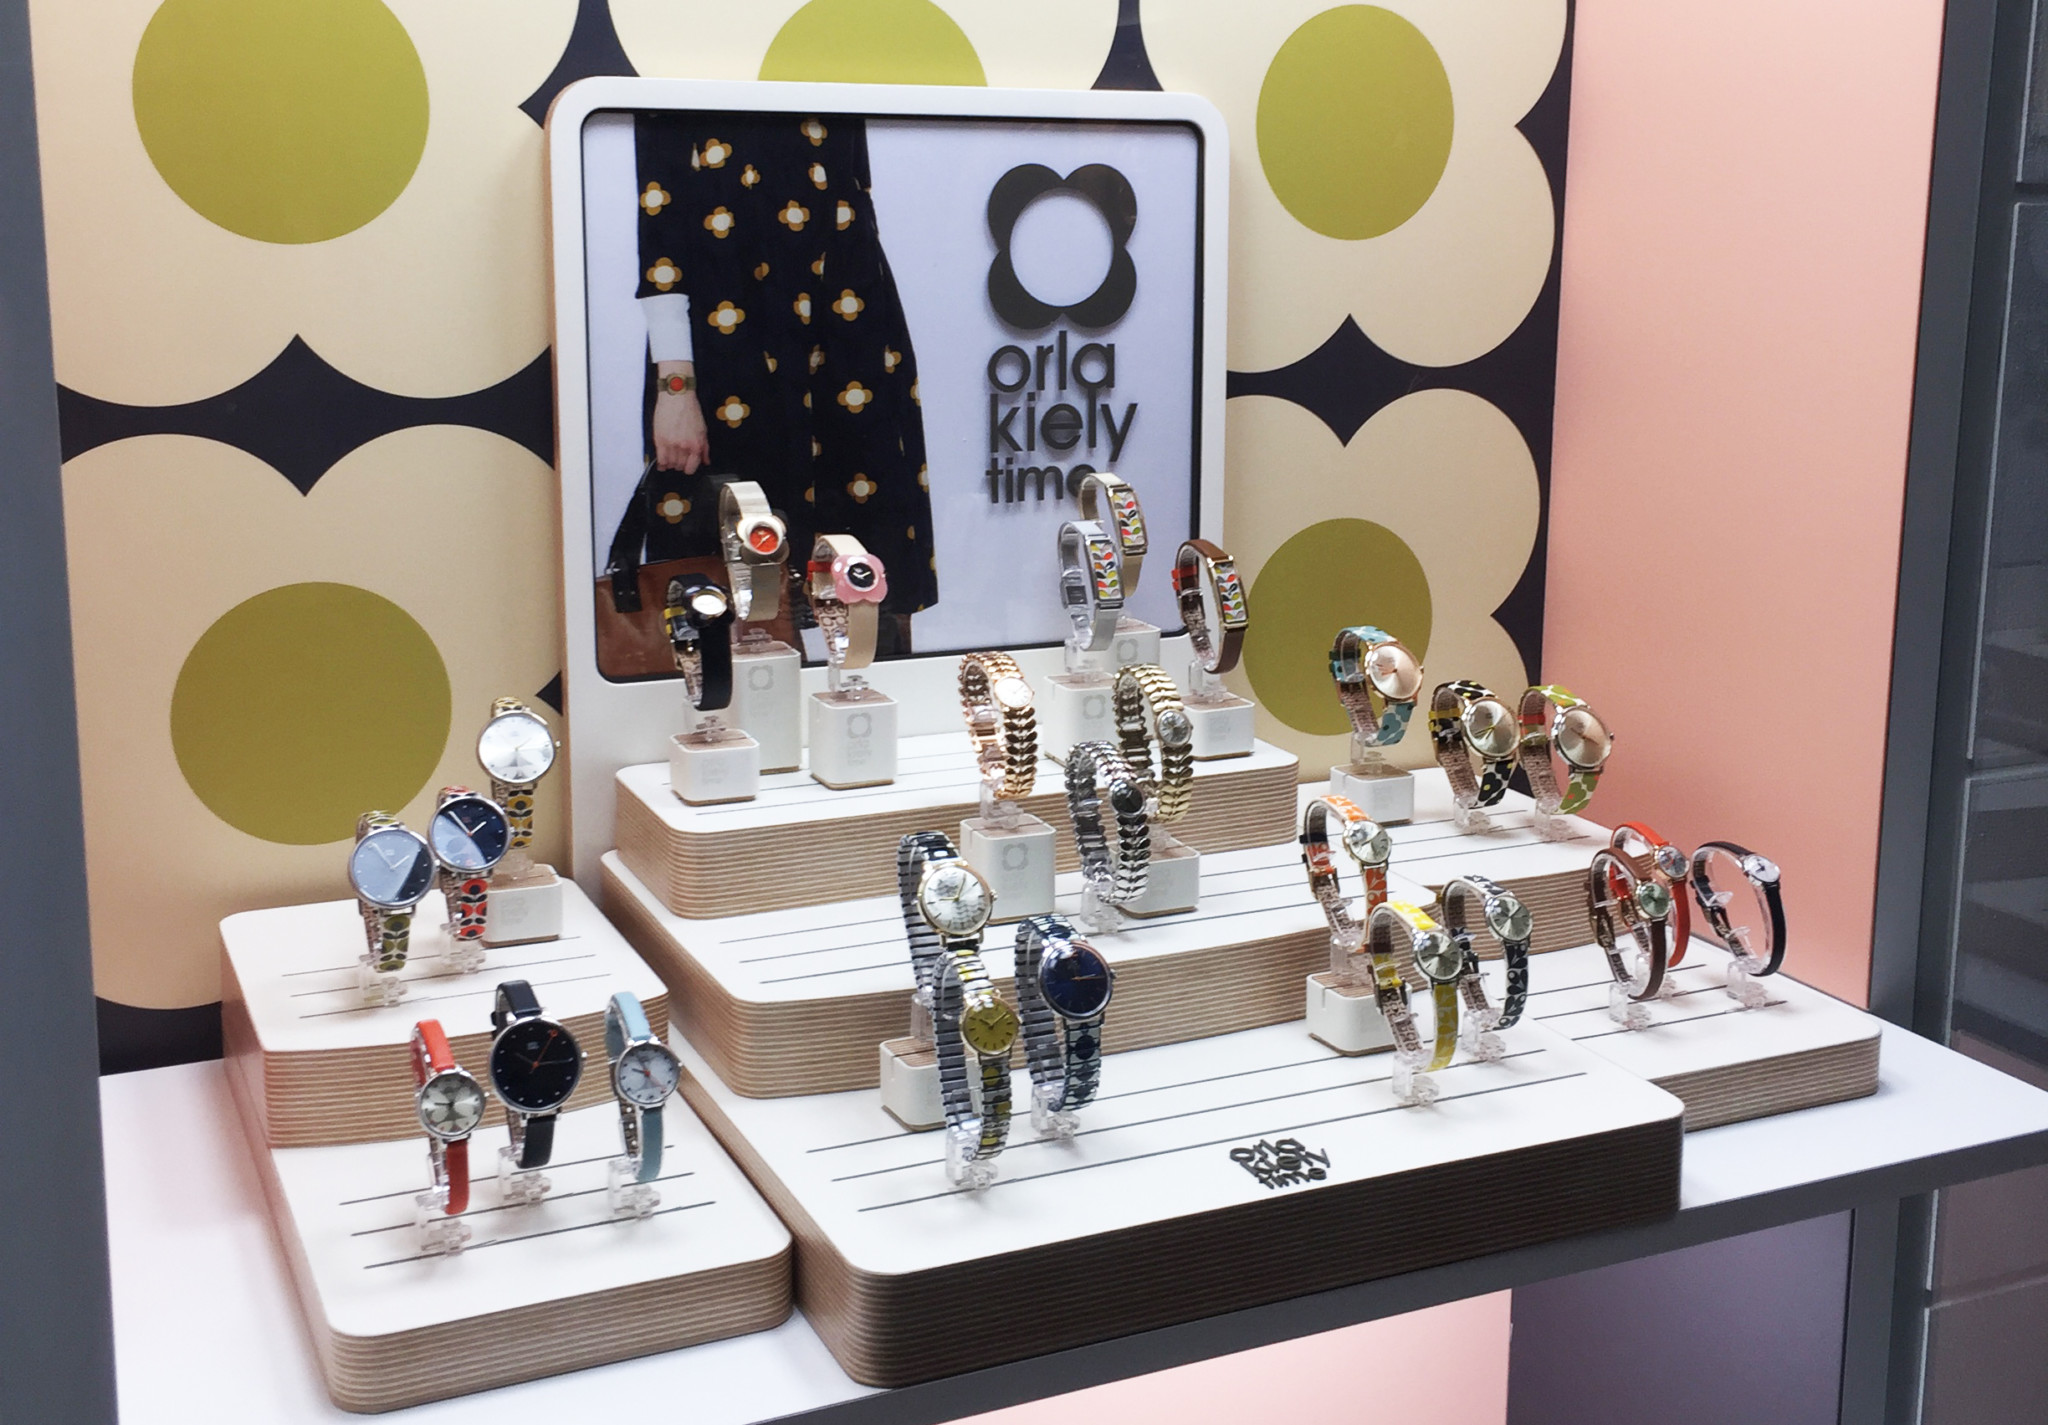 A promotional display for orla kiely watches produced by redd retail group.